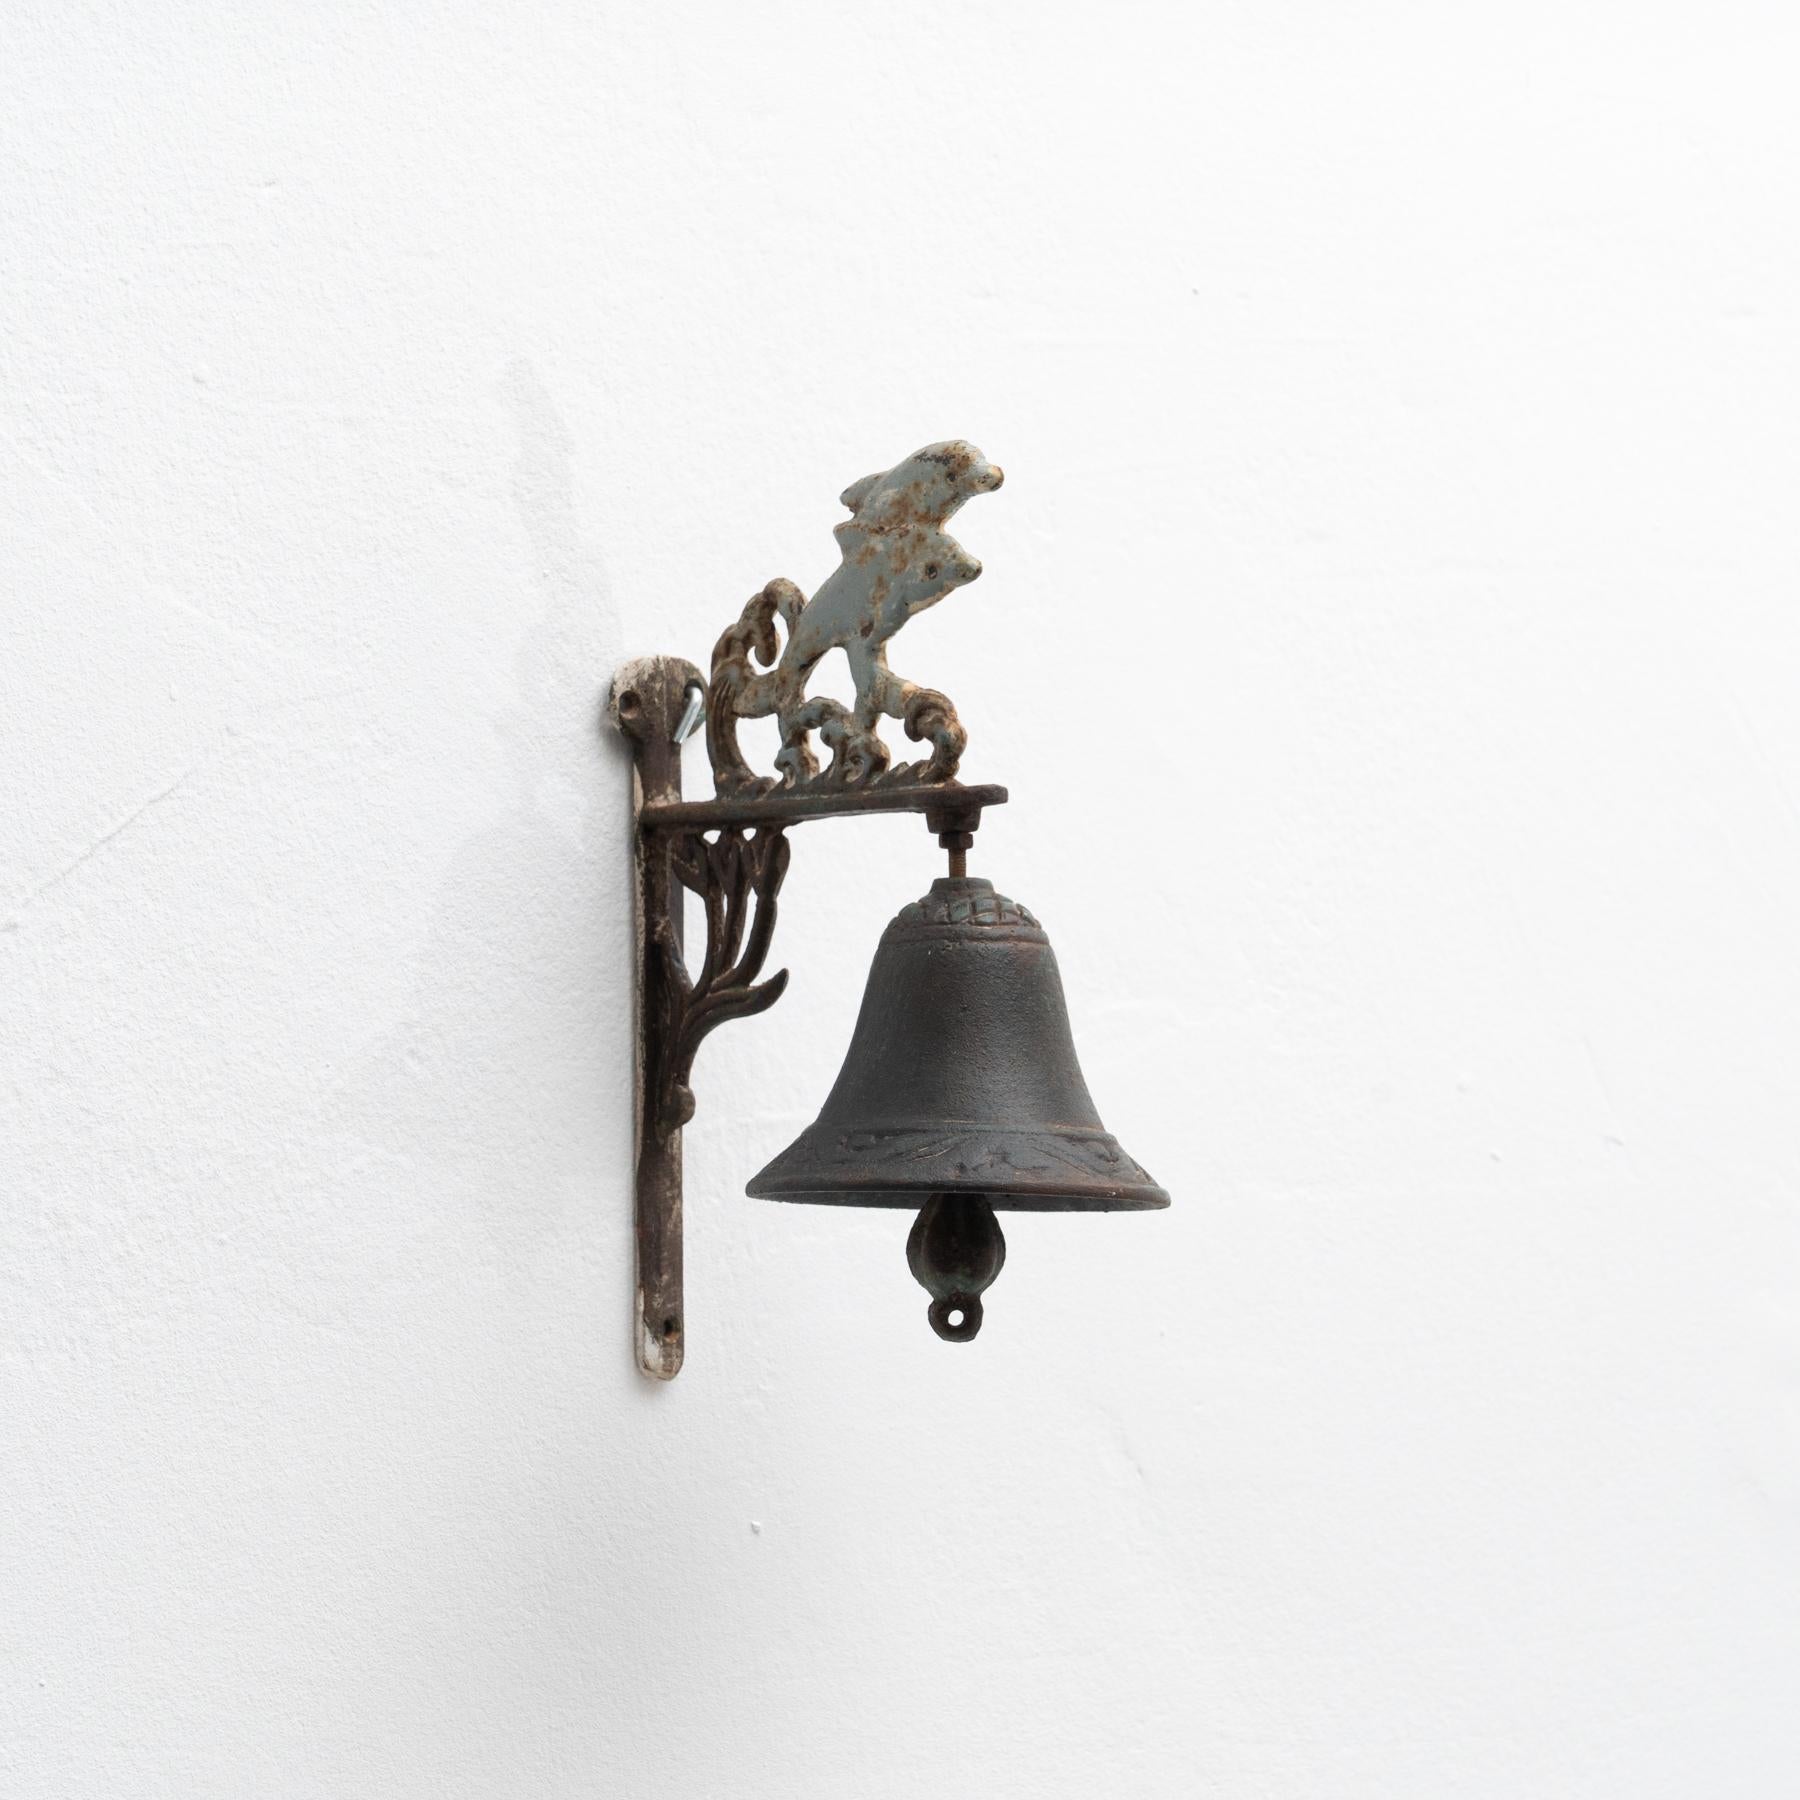 Wall cast iron decorative bell, circa early 20th century.

By unknown manufacturer, from Spain.

In original condition, with some visible signs of previous use and age, preserving a beautiful patina.

Materials:
Iron.